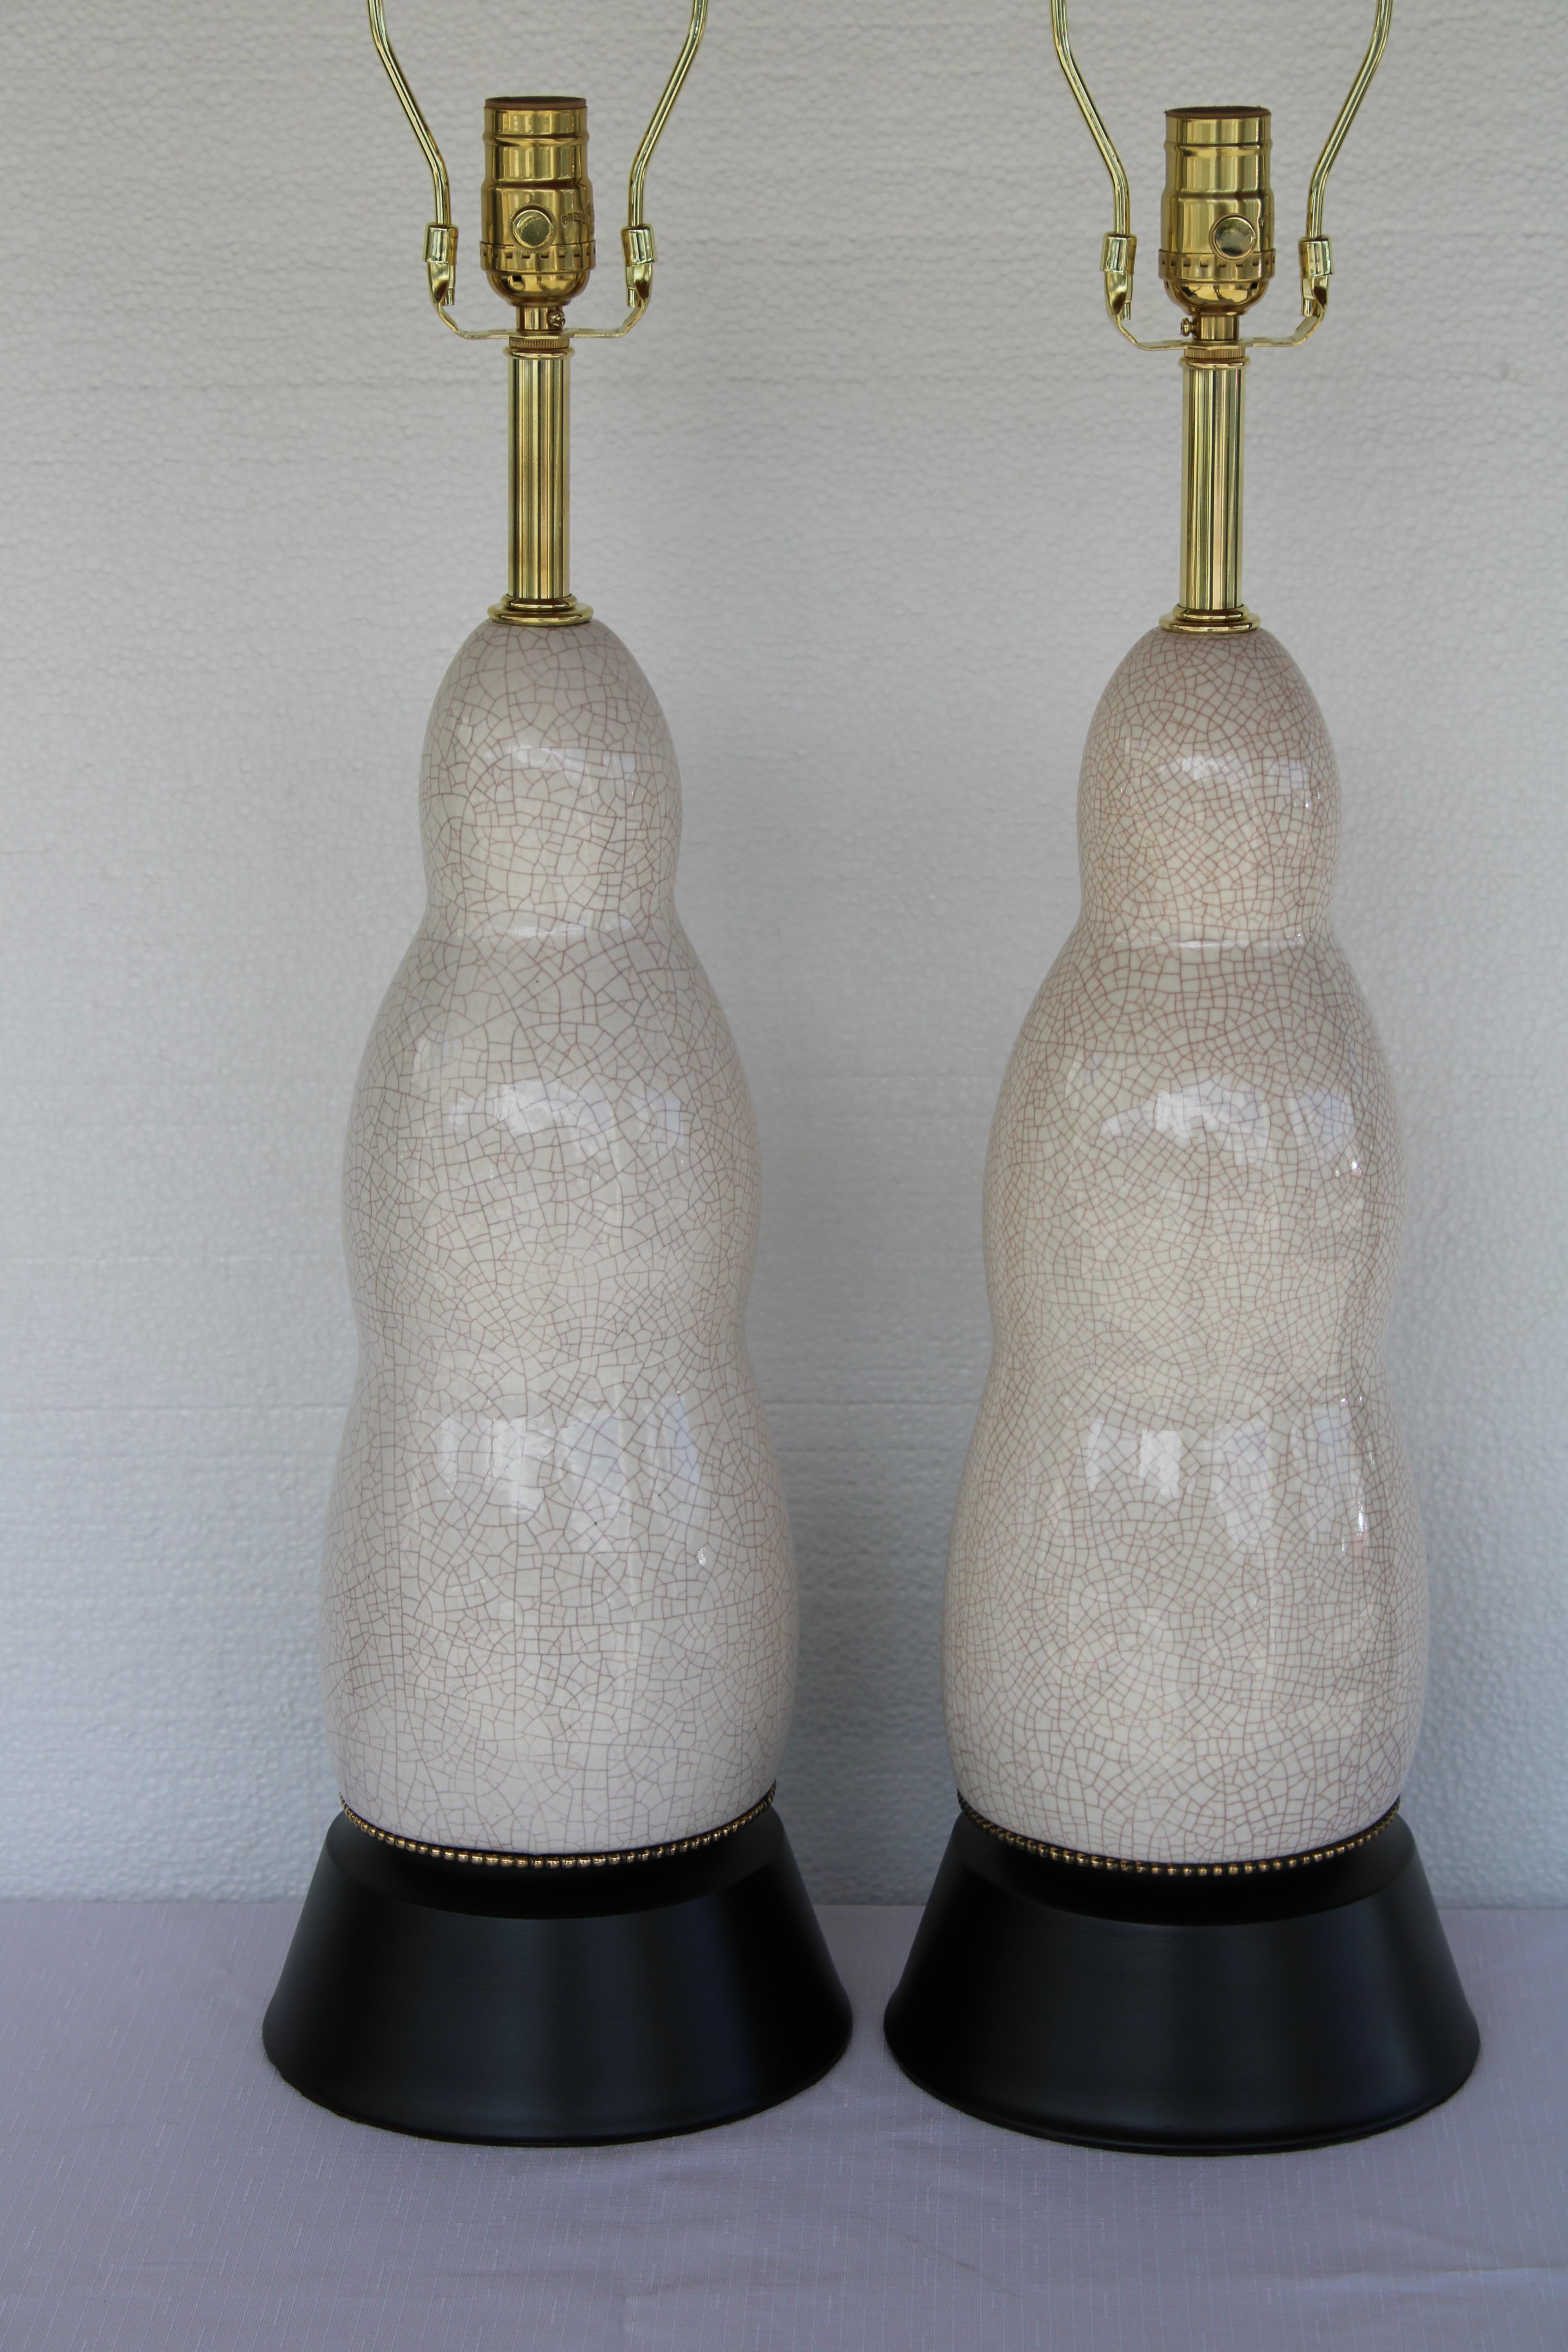 Pair of ceramic crackle glazee lamps.  Lamps have been professionally rewired for 3 way light bulbs. We painted the bases black and added new brass necks and high quality brass hardware.  Lamps measure 24